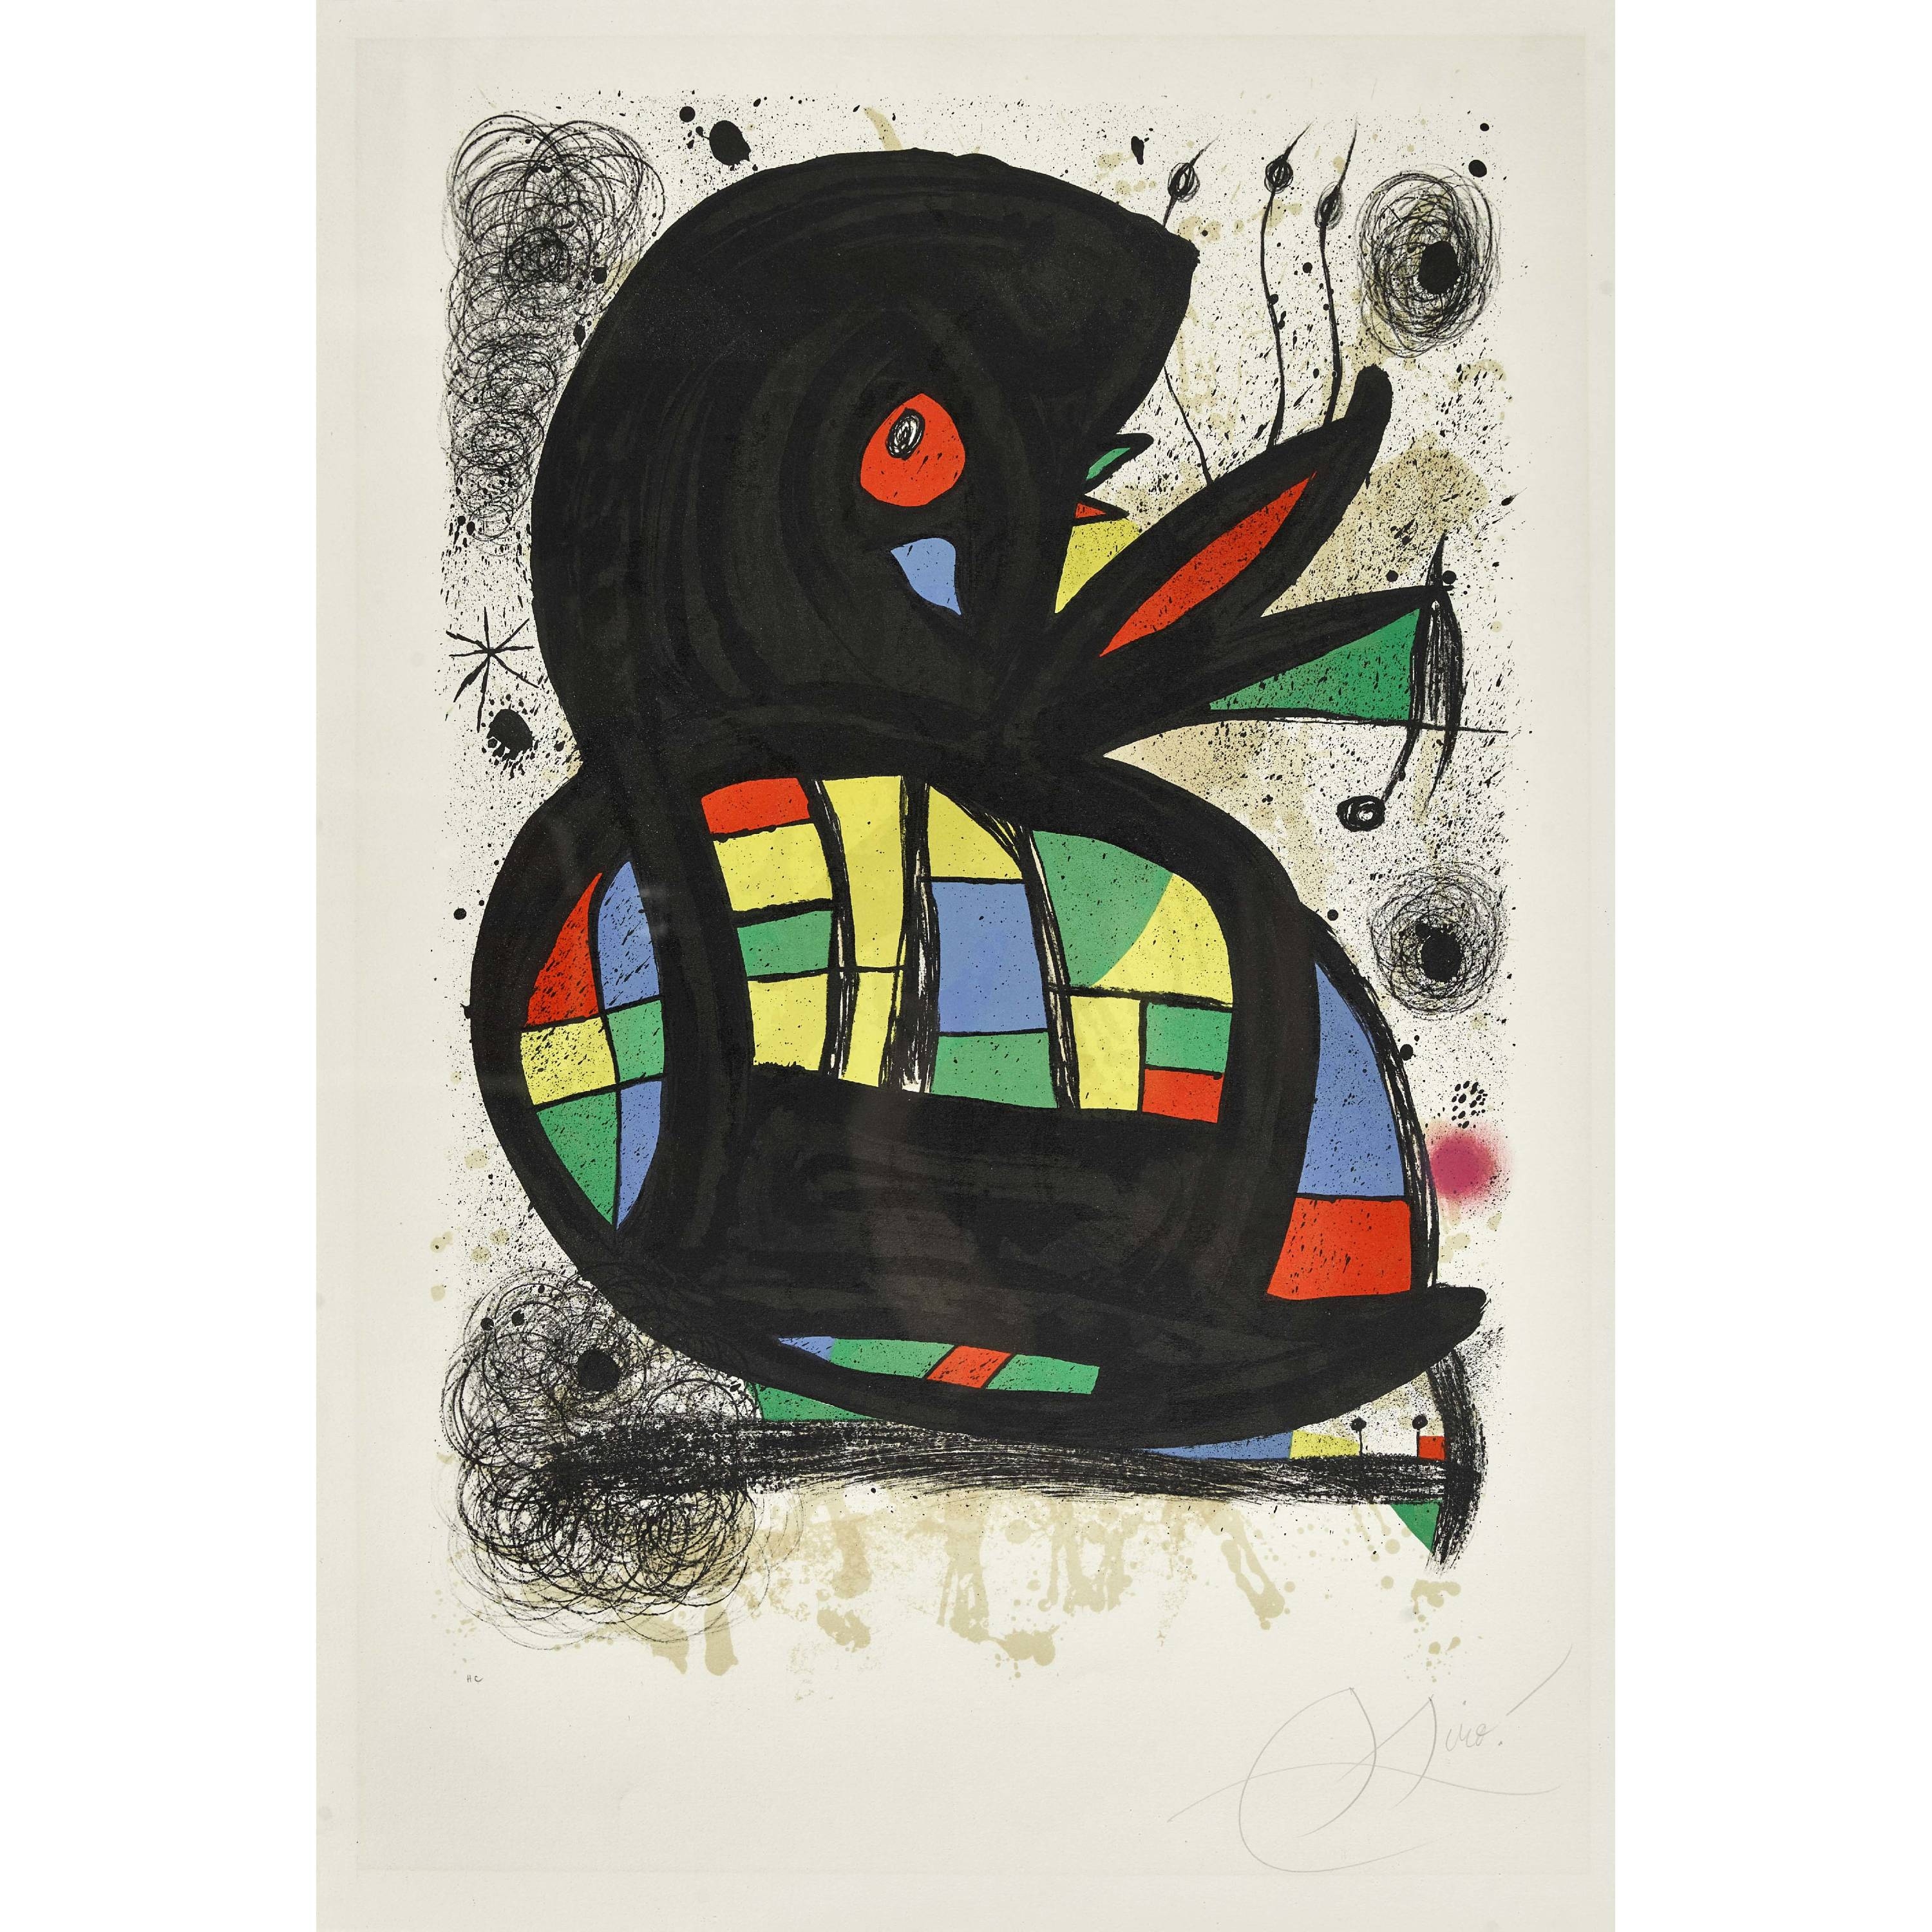 Artwork by Joan Miró, Miro fondation maeght, Made of lithograph in colors